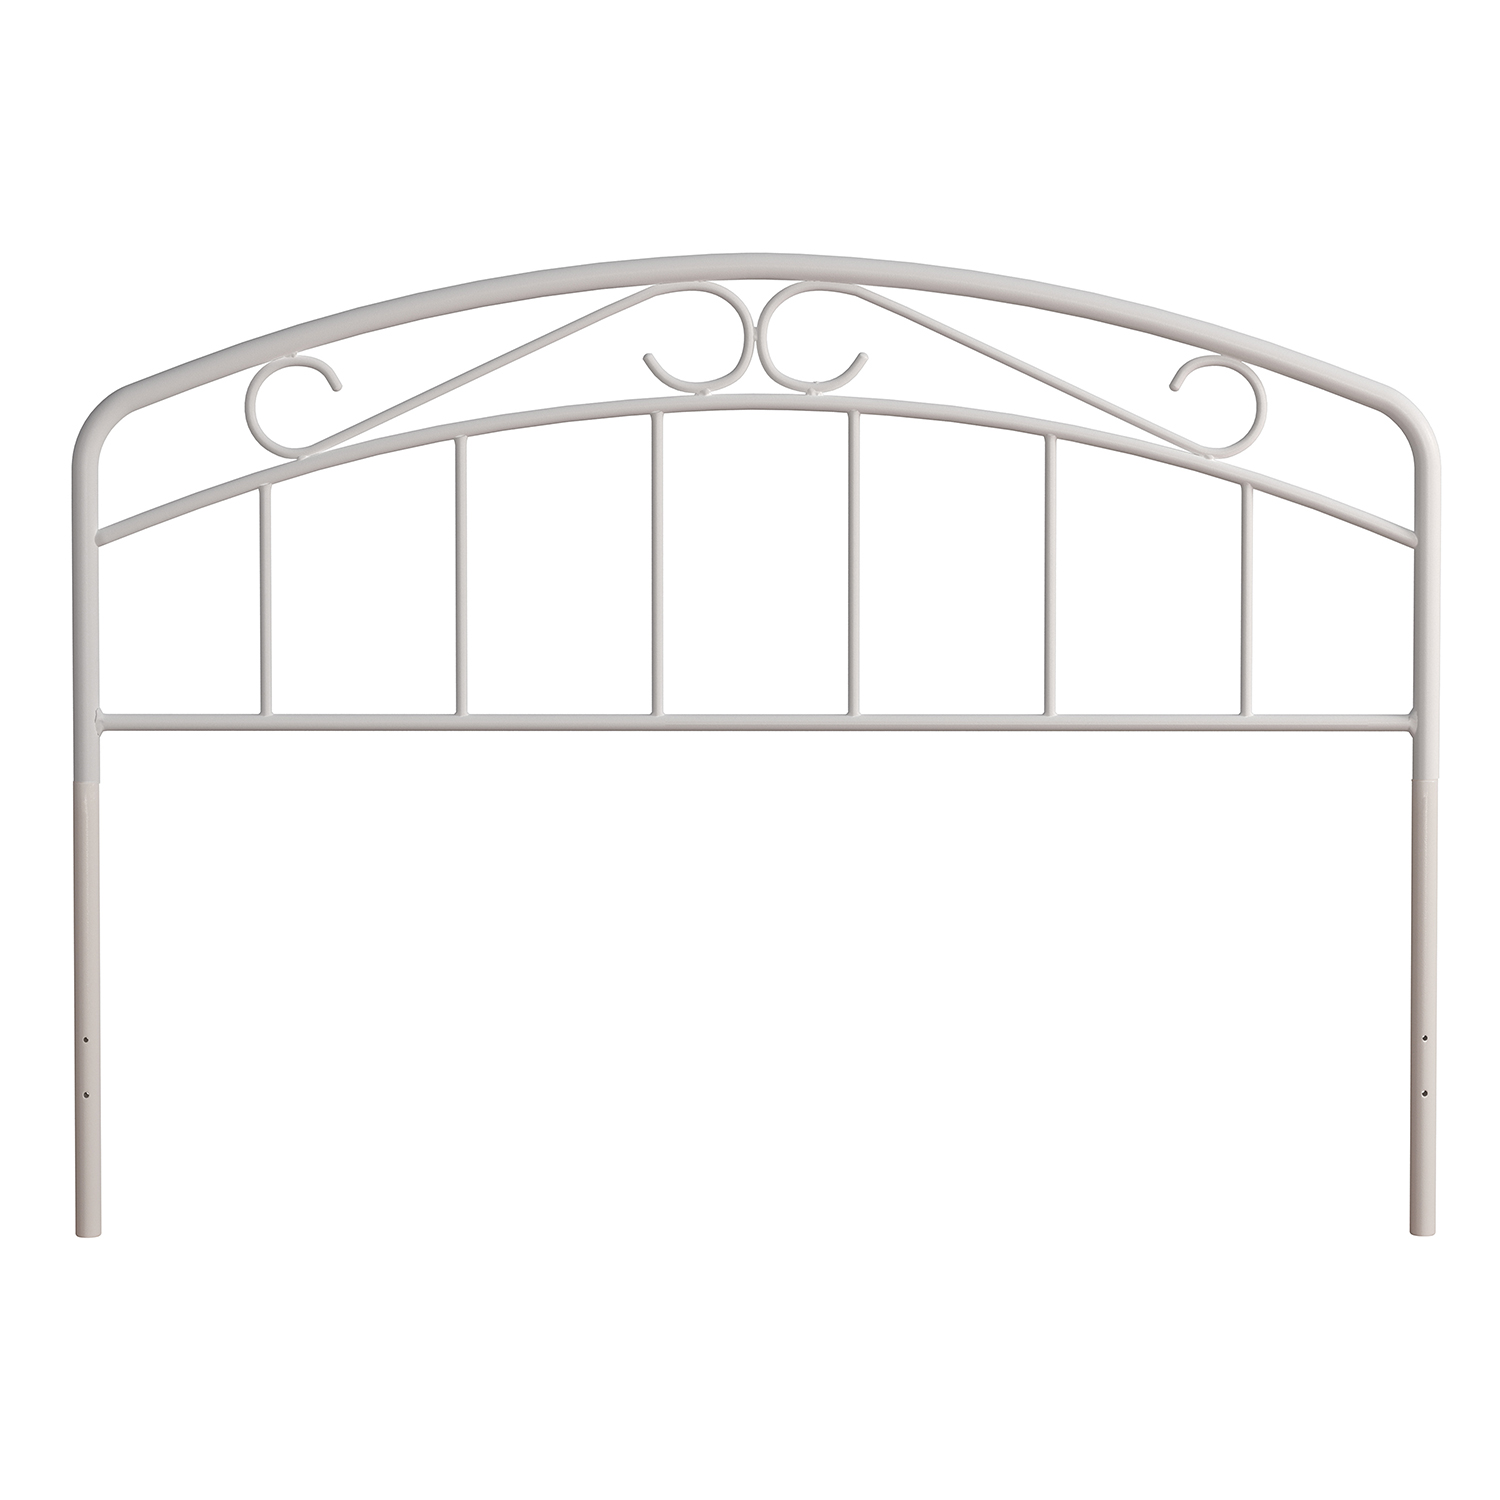 Hillsdale Jolie Metal Headboard with Arched Scroll Design - White